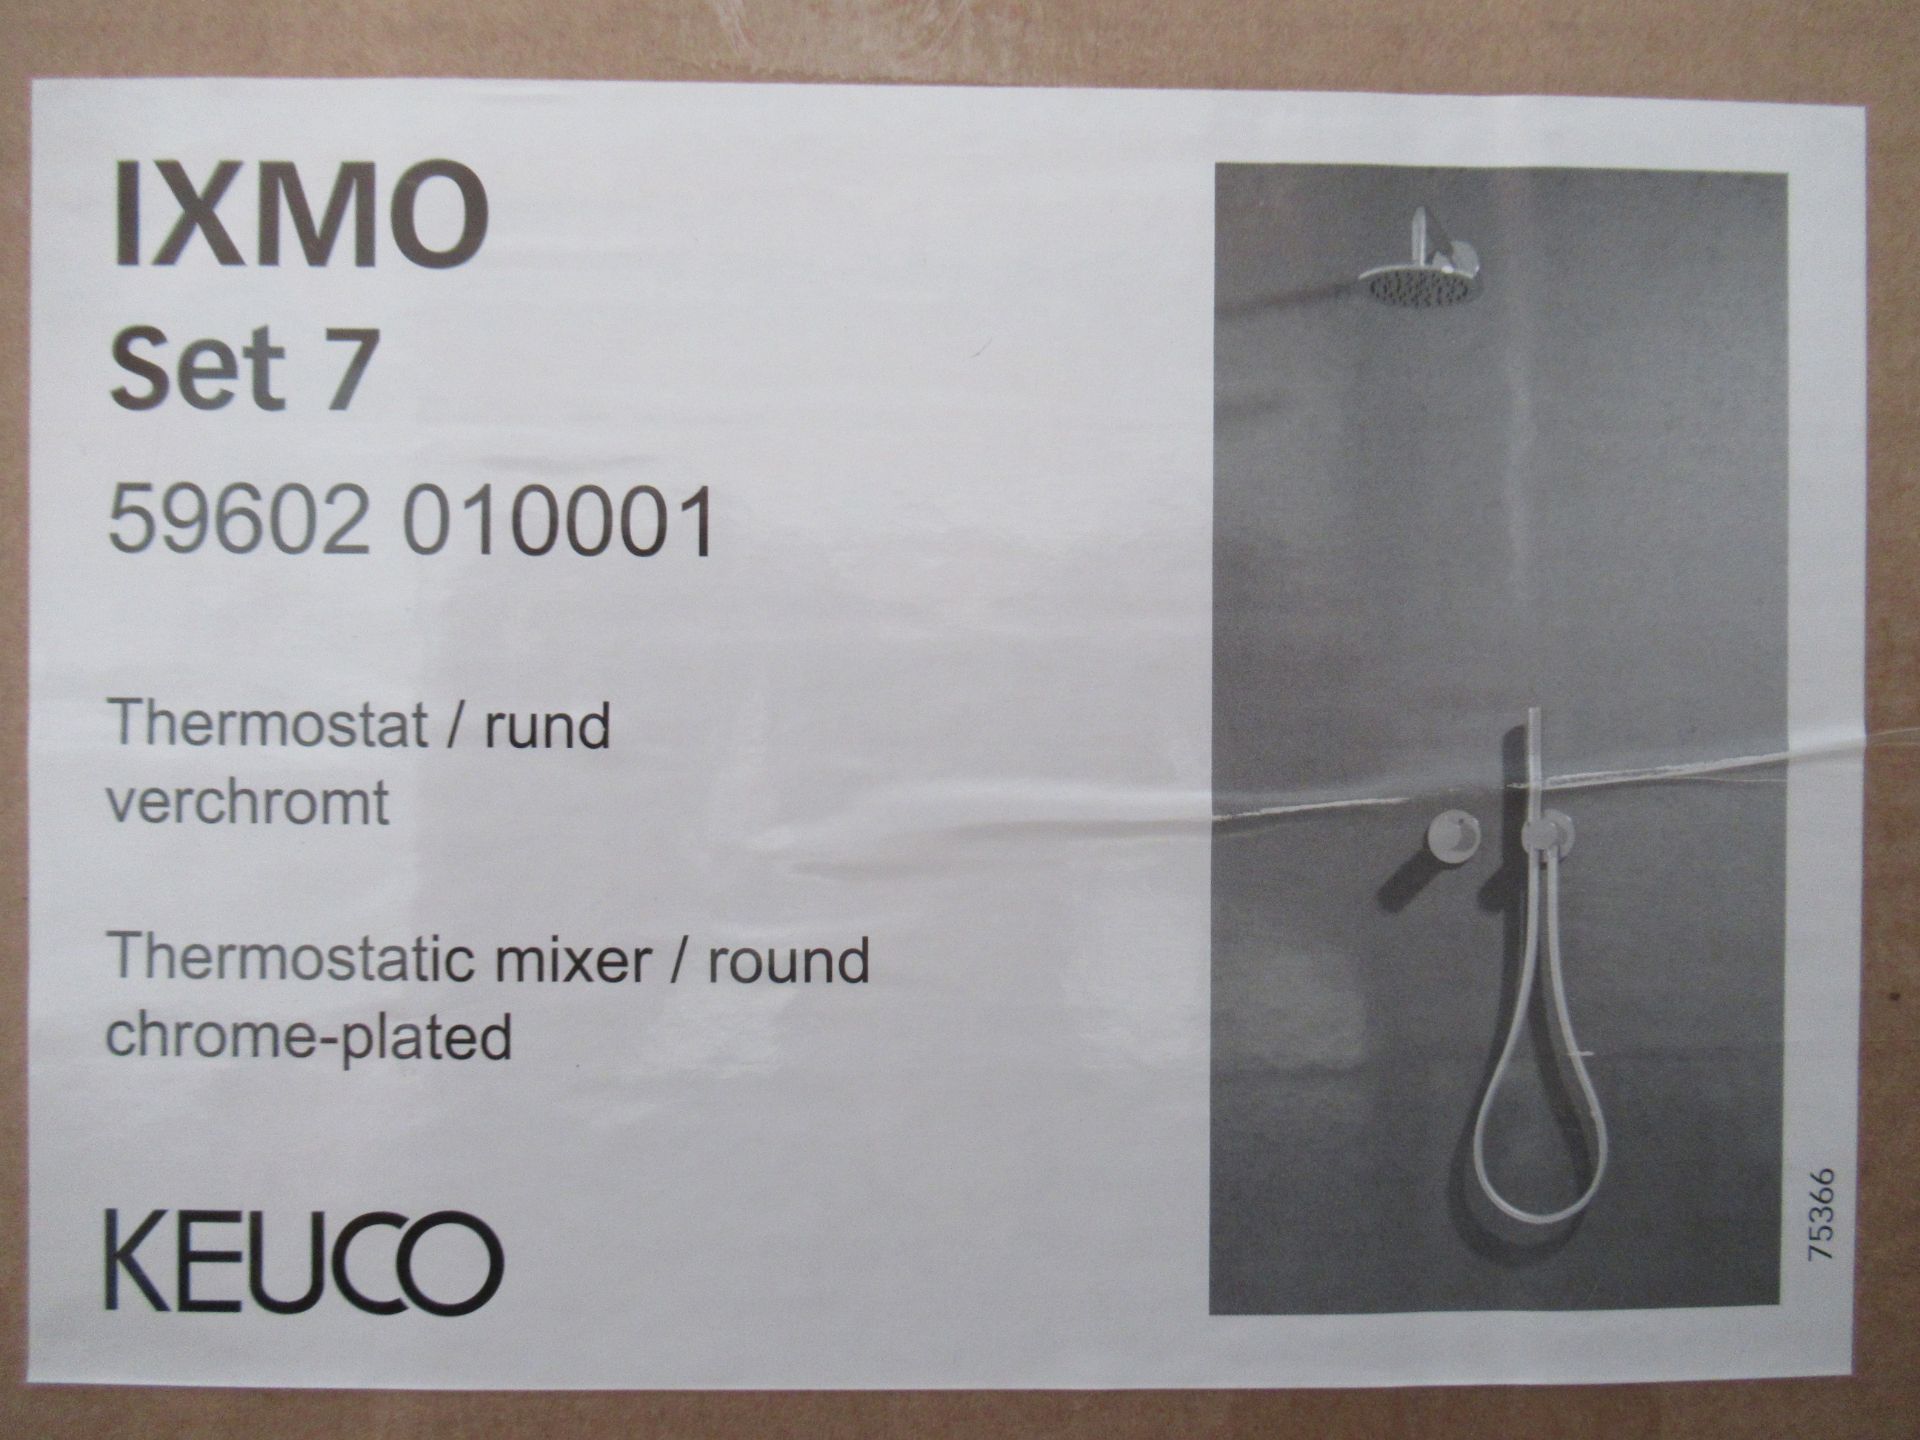 A Keuco IXMO Set 7 Thermostatic Mixer/Round Chrome Plated Shower Kit, P/N 59602-010001 - Image 2 of 2